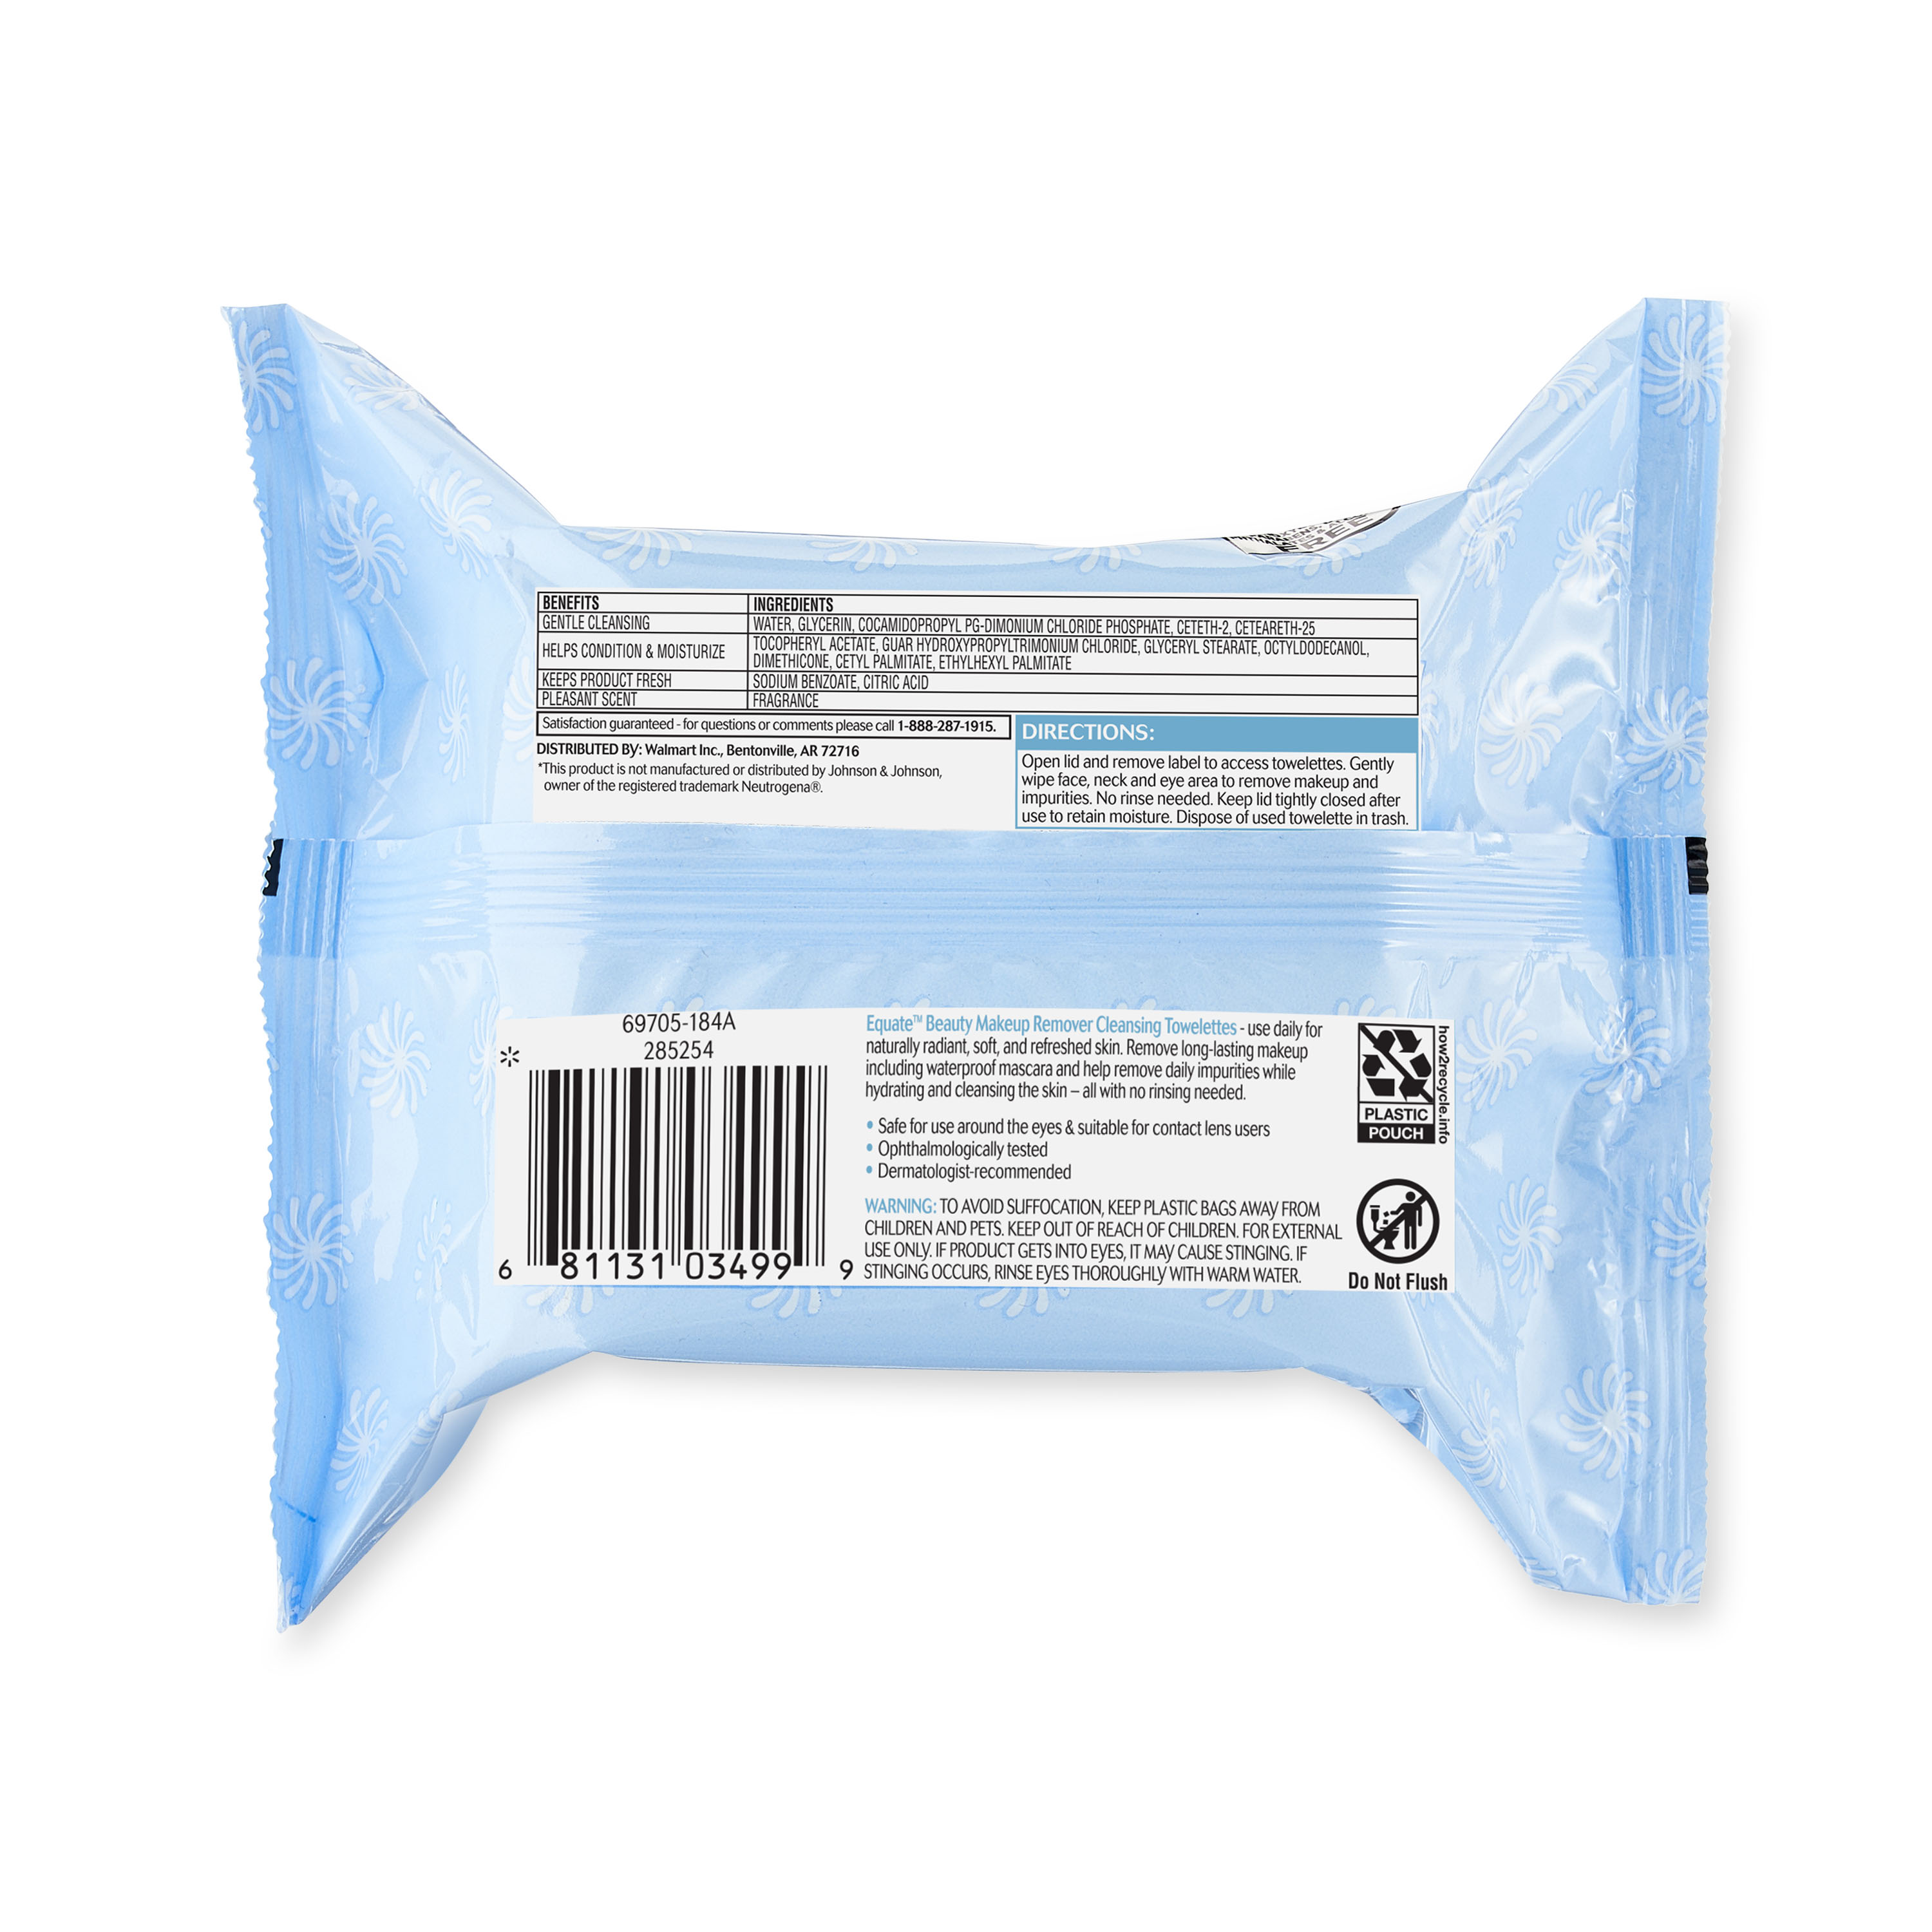 Equate Beauty Makeup Remover Cleansing Towelettes, 40 Towelettes - image 5 of 7